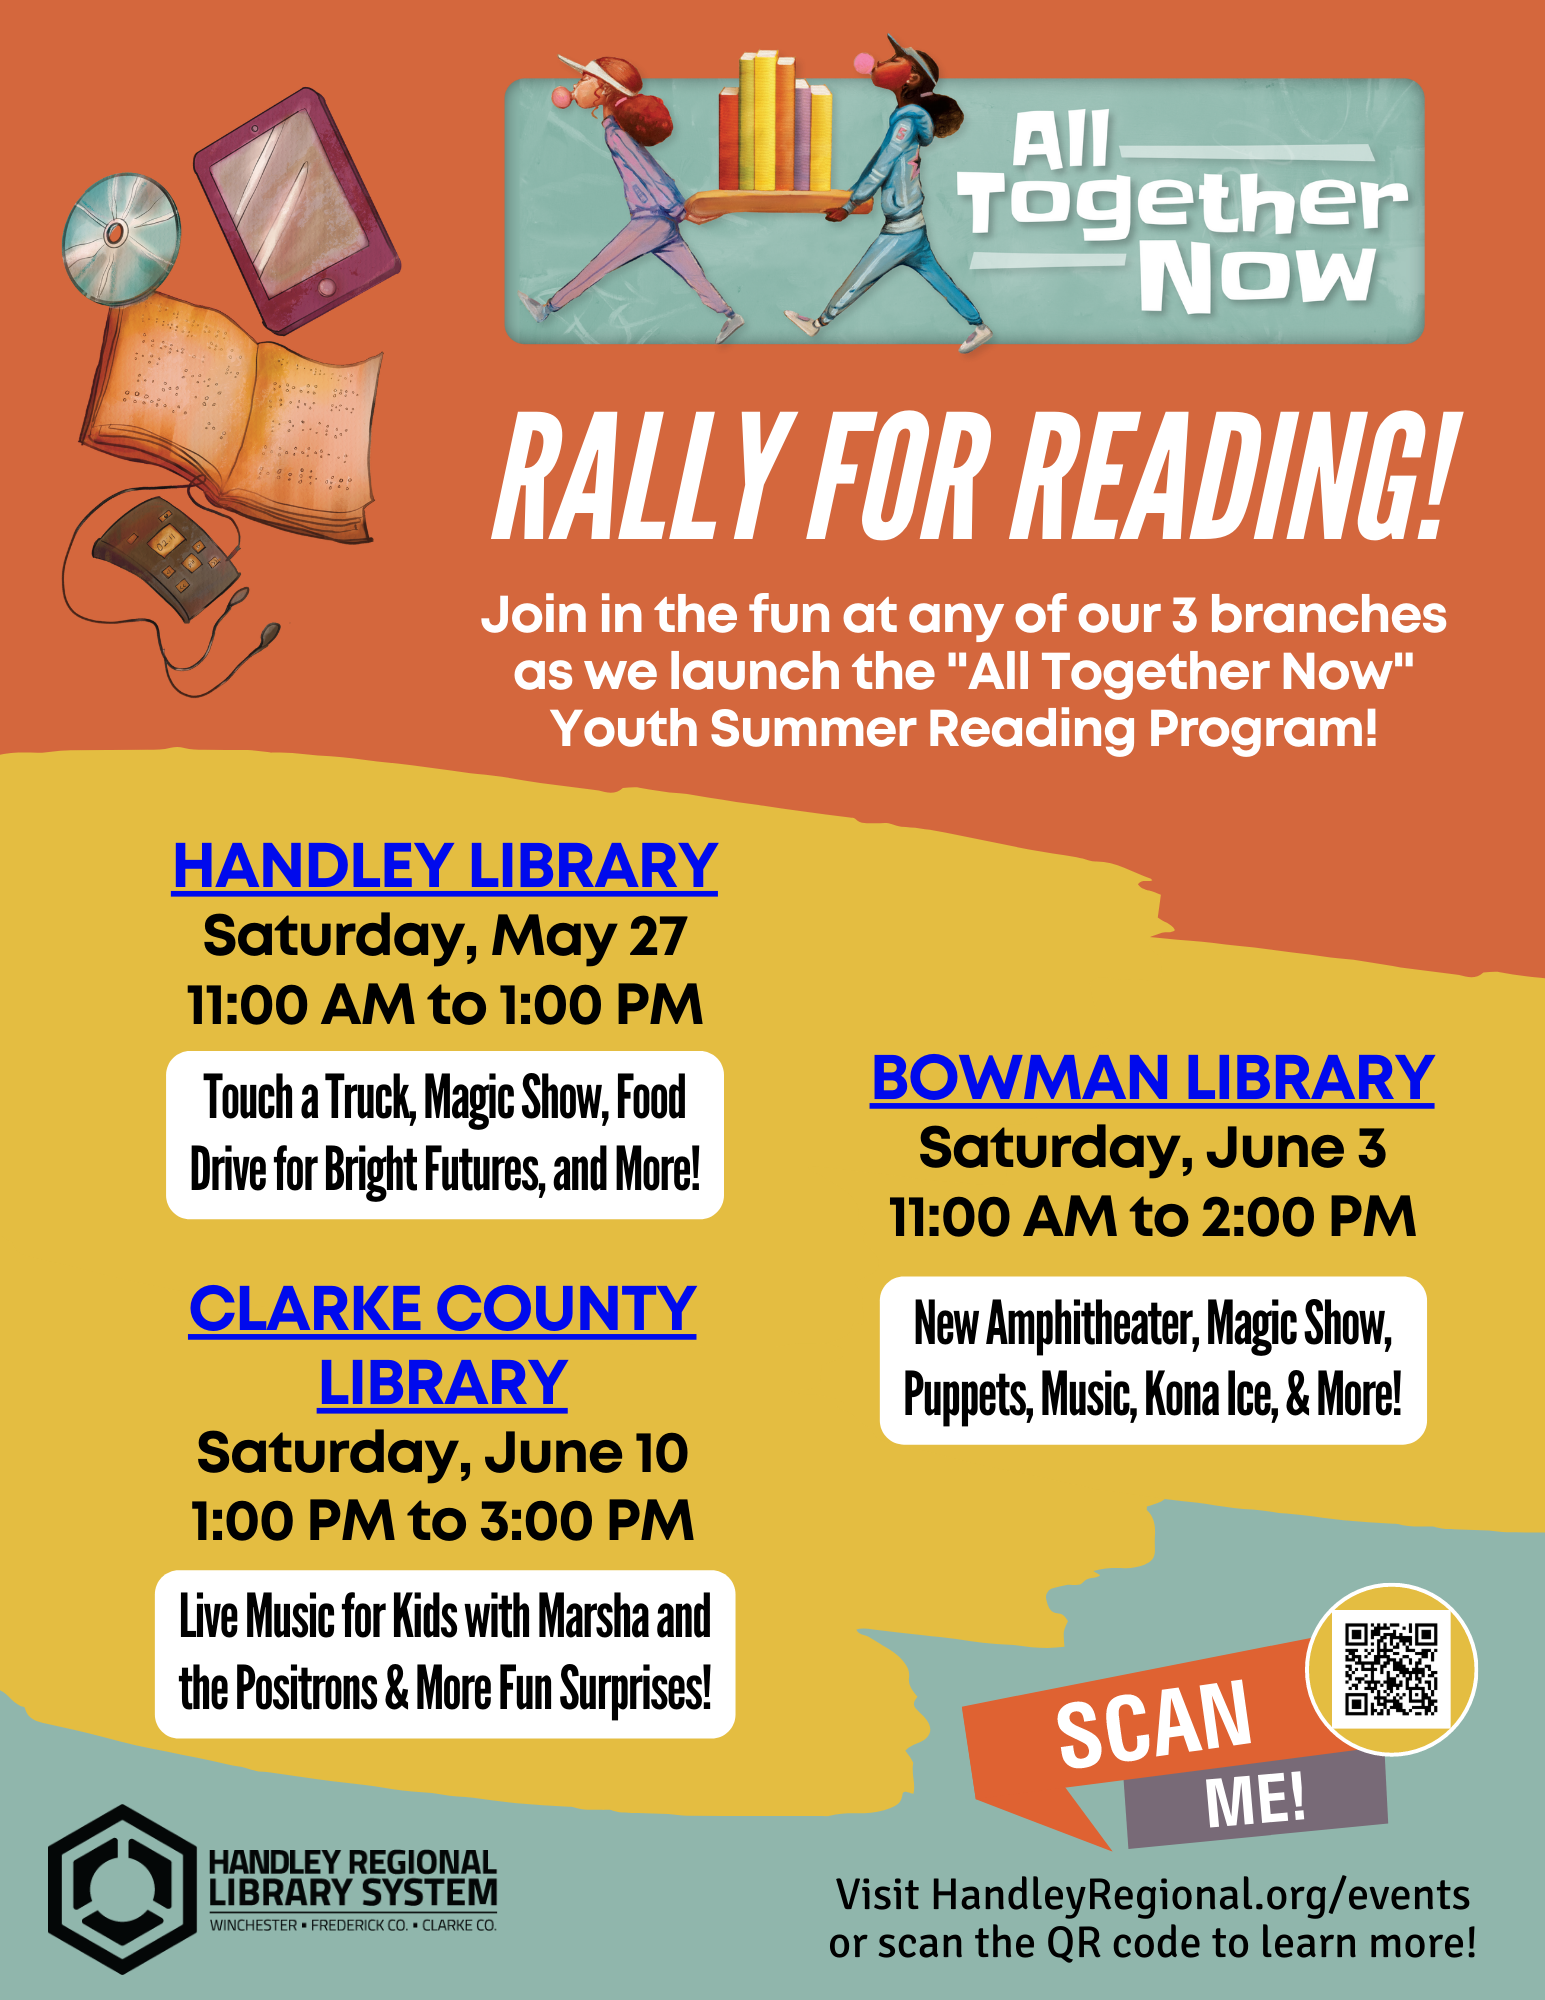 Rally for Reading is HUGE this year! Handley Regional Library System